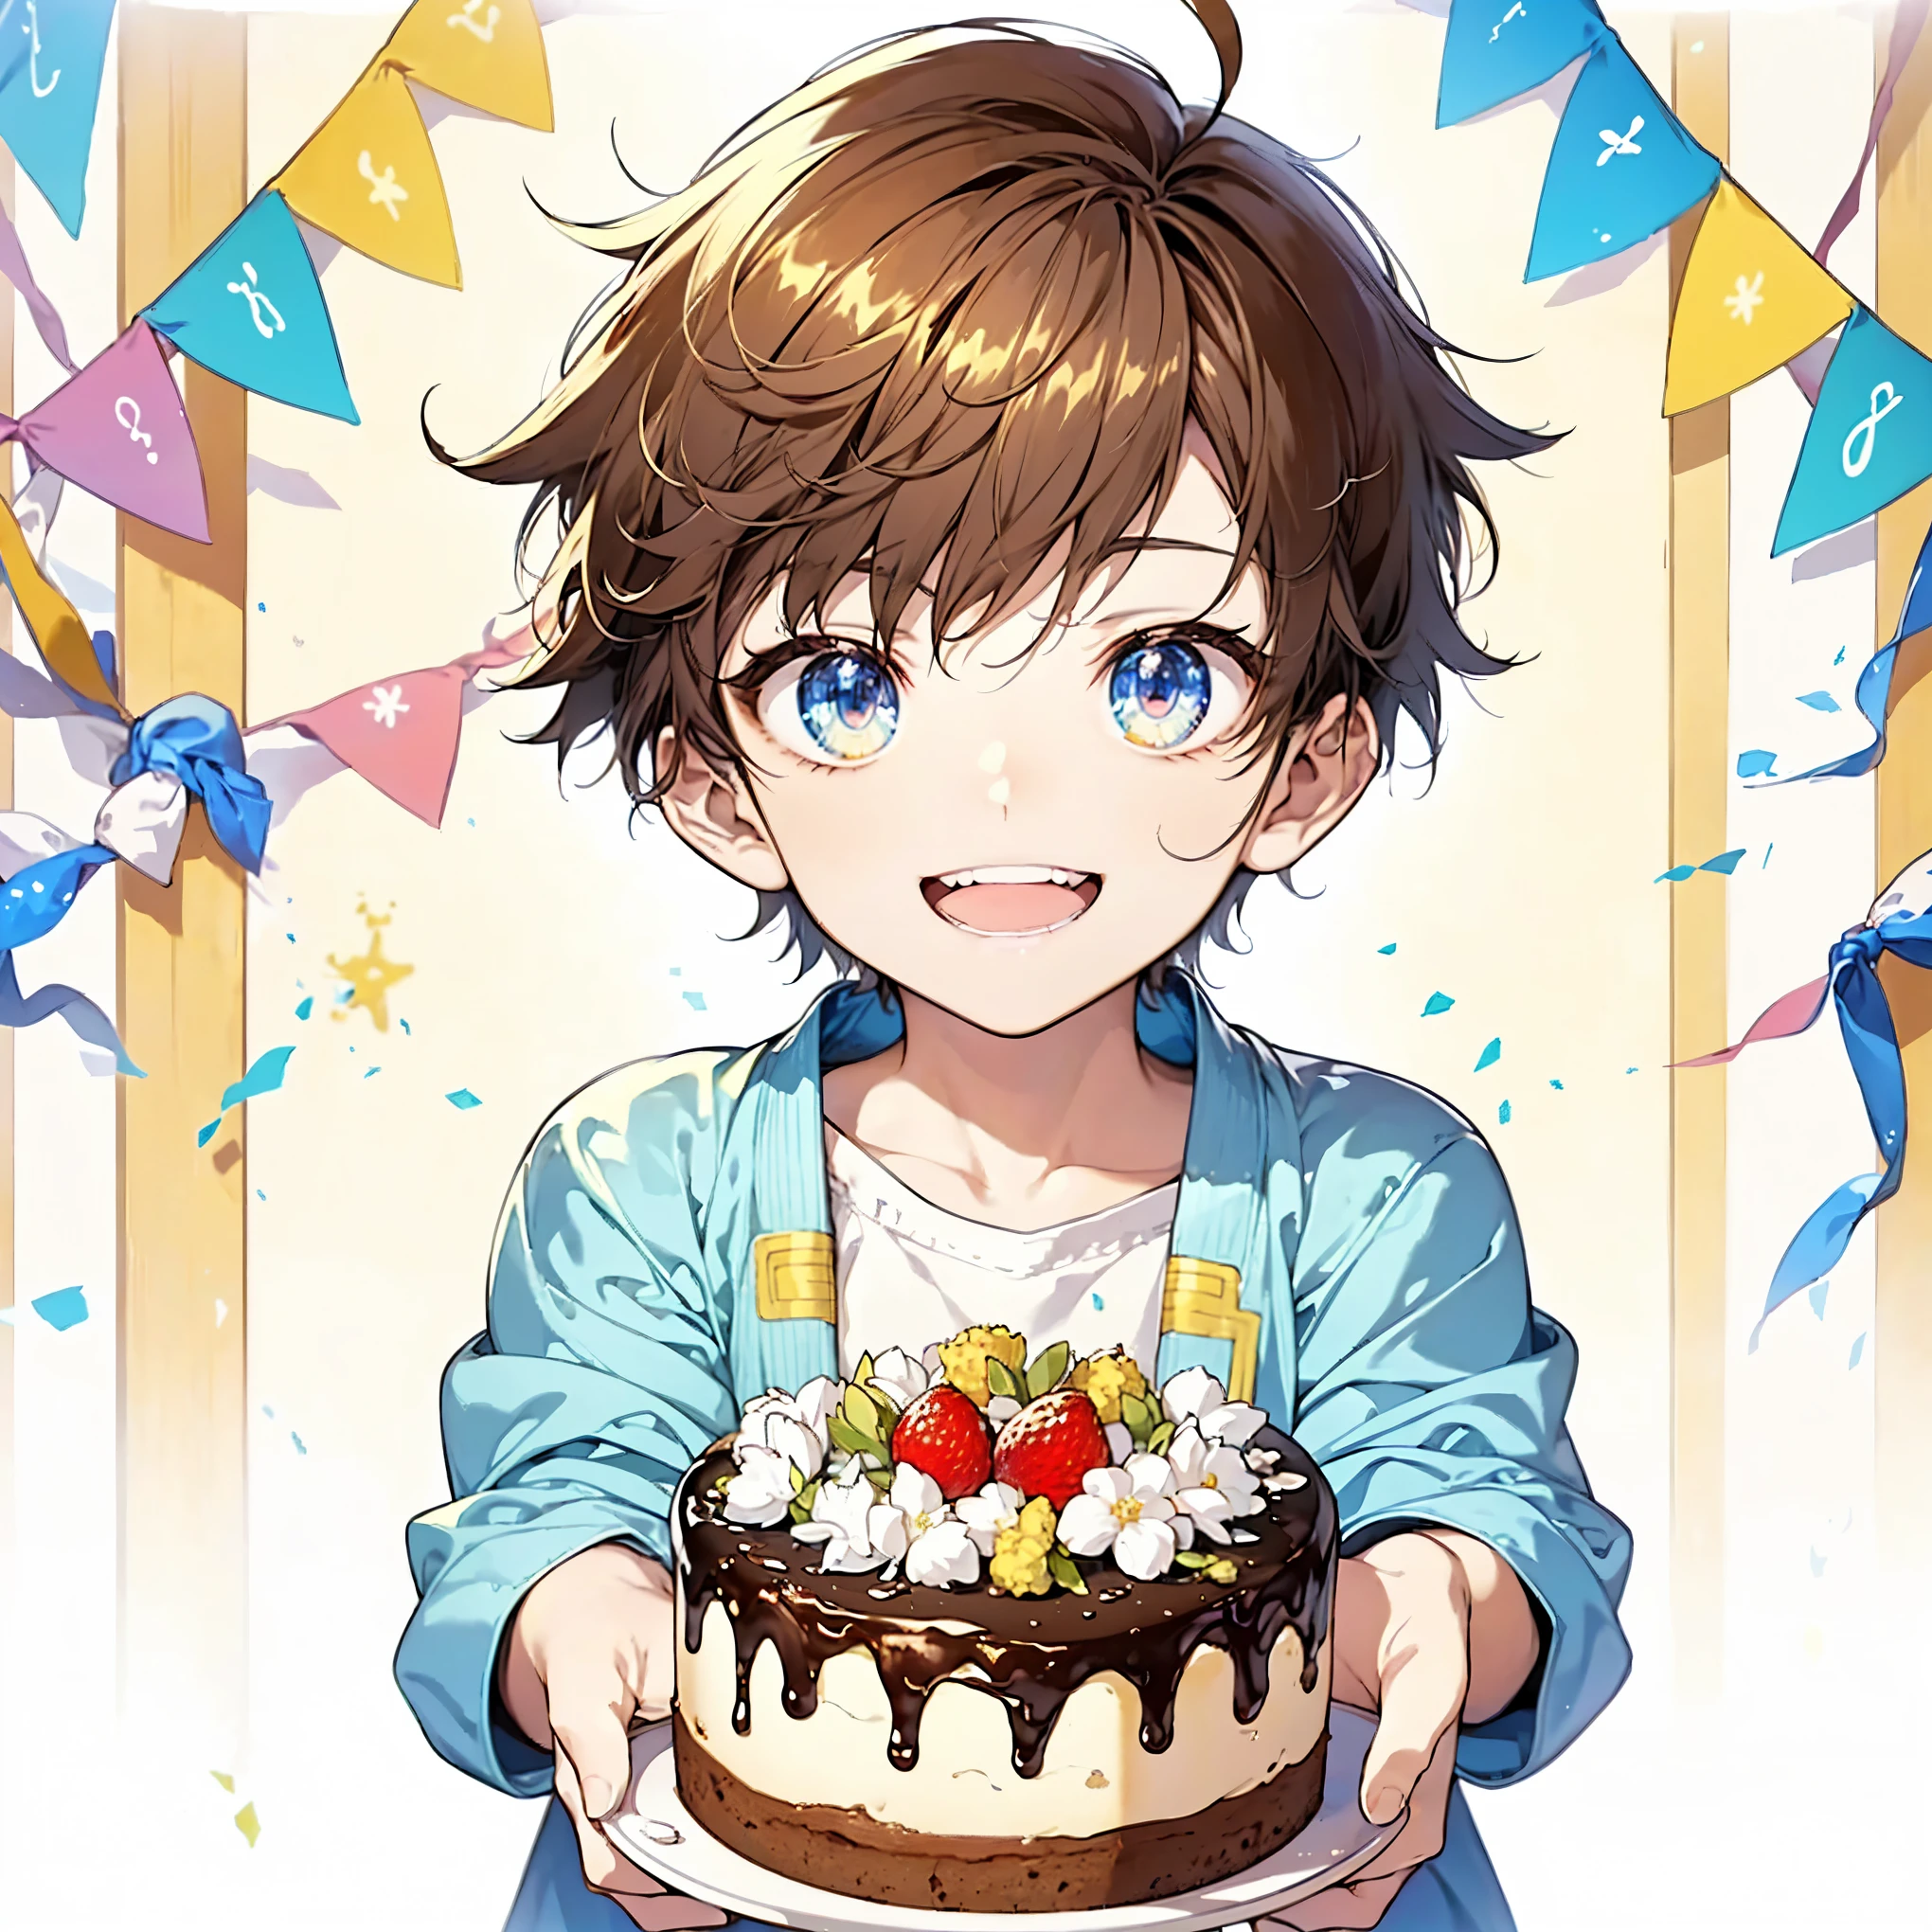 A cute anime-style young boy offering a cake. The boy has a cheerful expression, large sparkling eyes, and is wearing casual clothes. He is standing with the cake in both hands, extending it forward. The cake is decorated with colorful candles and frosting, looking festive and inviting. The background features celebratory ribbons and a cheerful atmosphere,(detailed eyes),detailed skin,masterpiece,